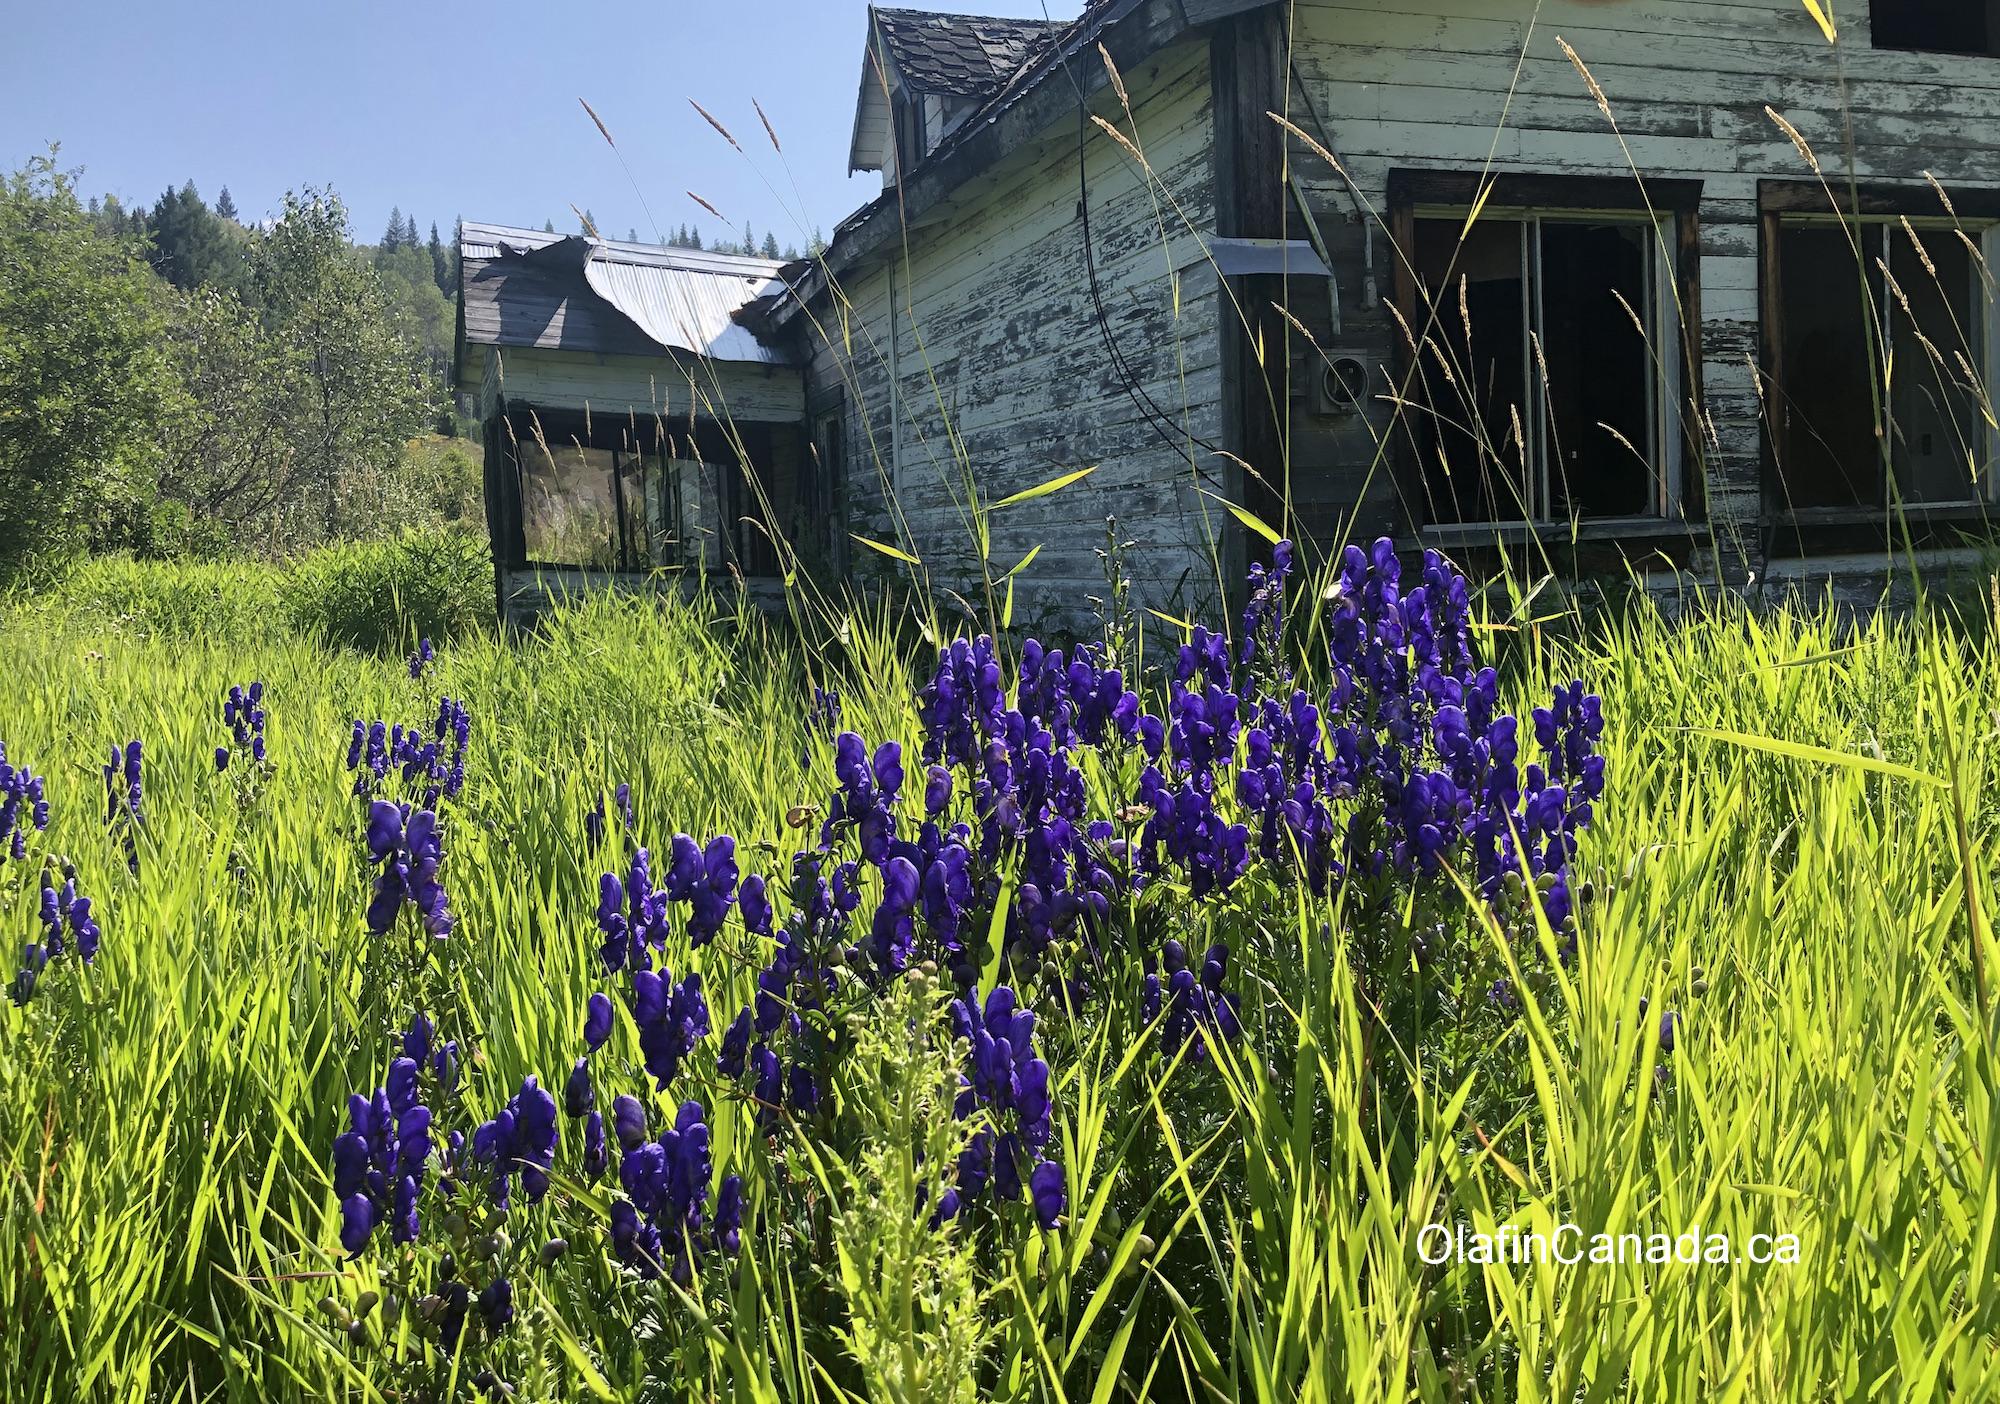 Purple monkshood in front of abandoned house on Clearwater Valley Road in Wells Gray Park #olafincanada #britishcolumbia #discoverbc #abandonedbc #clearwater